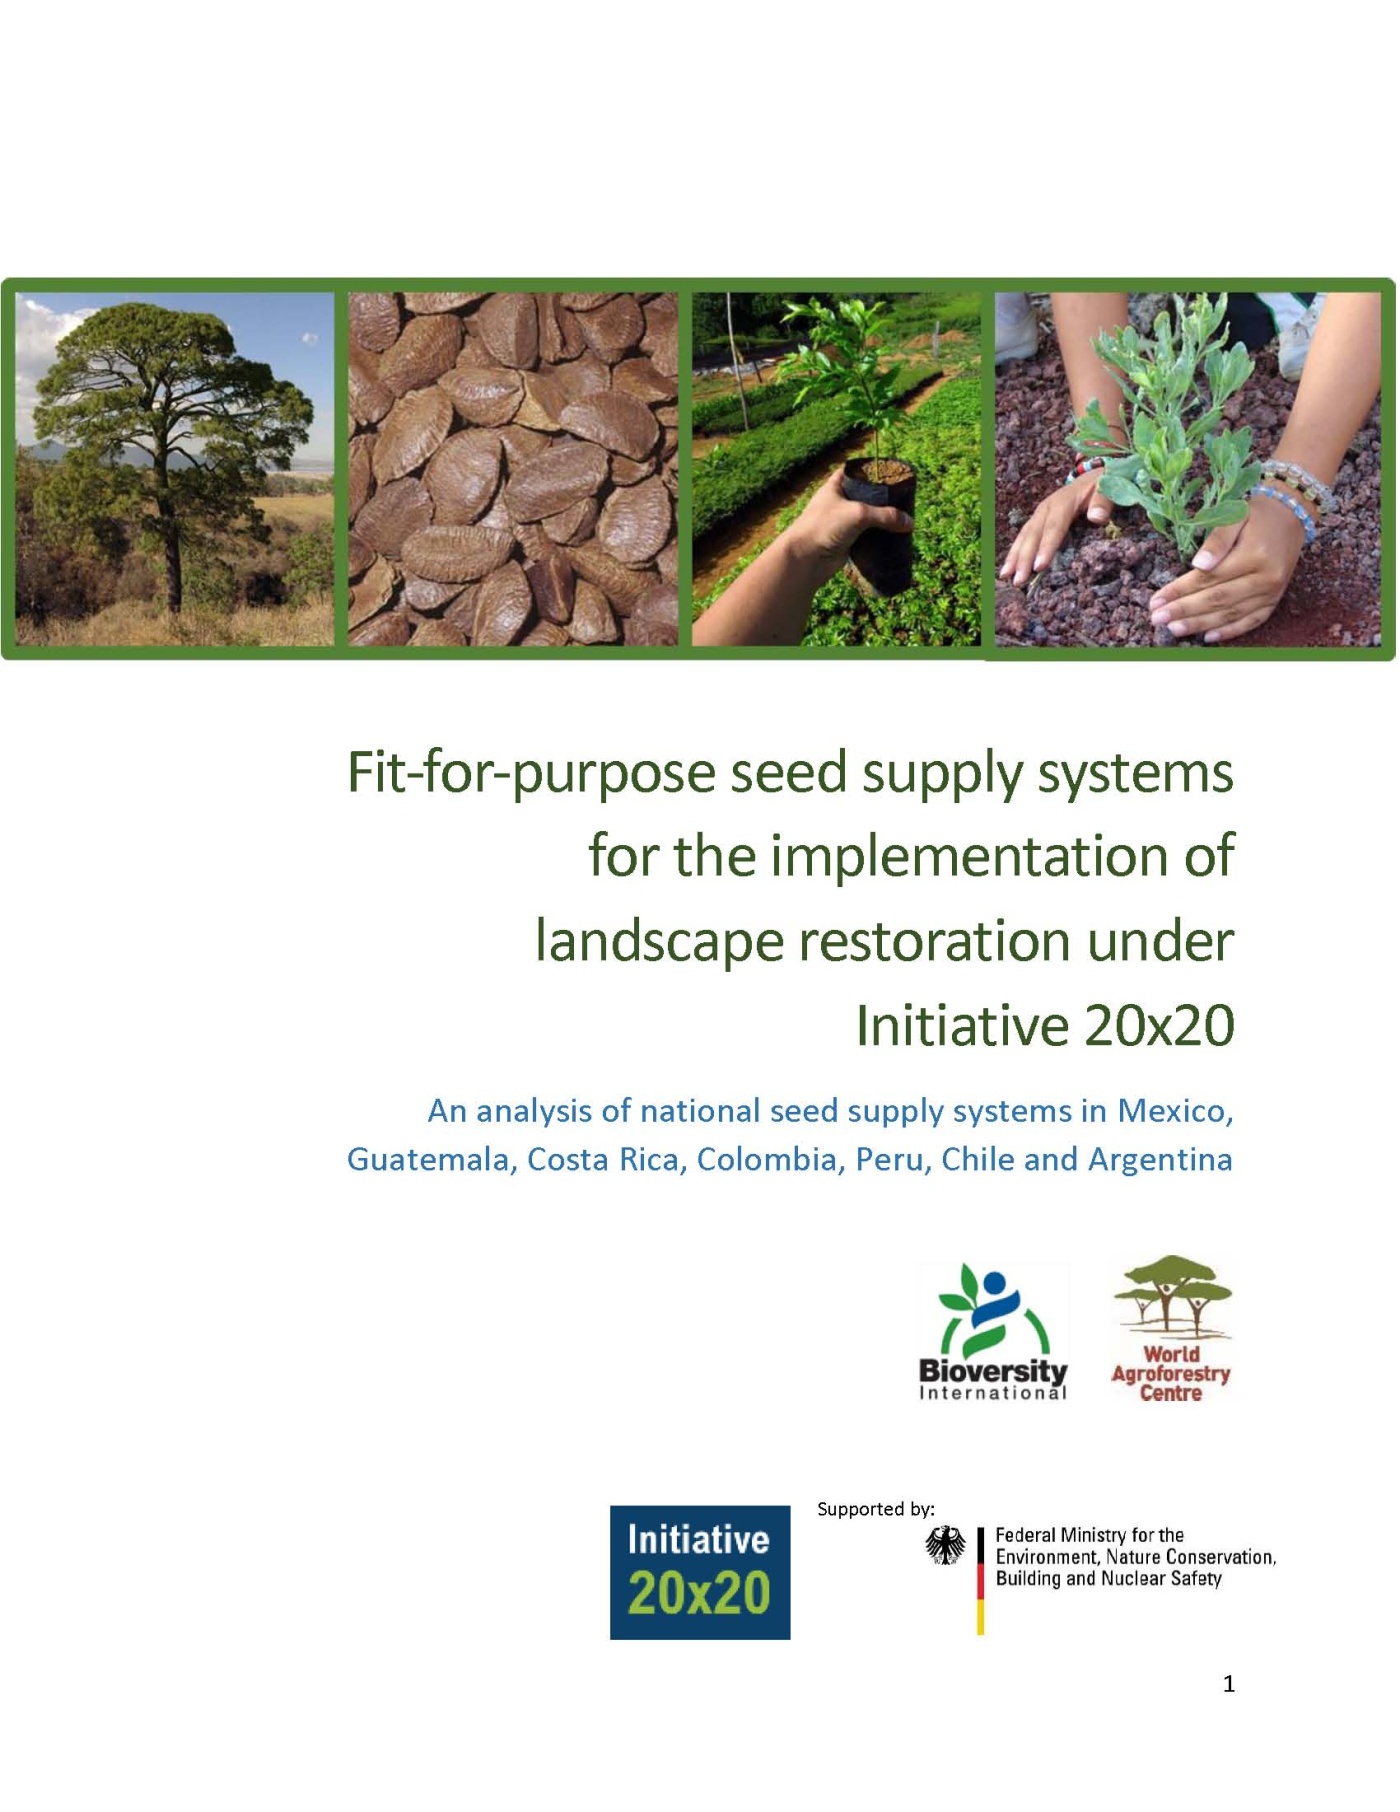 Seed supply systems for the implementation of landscape restoration 